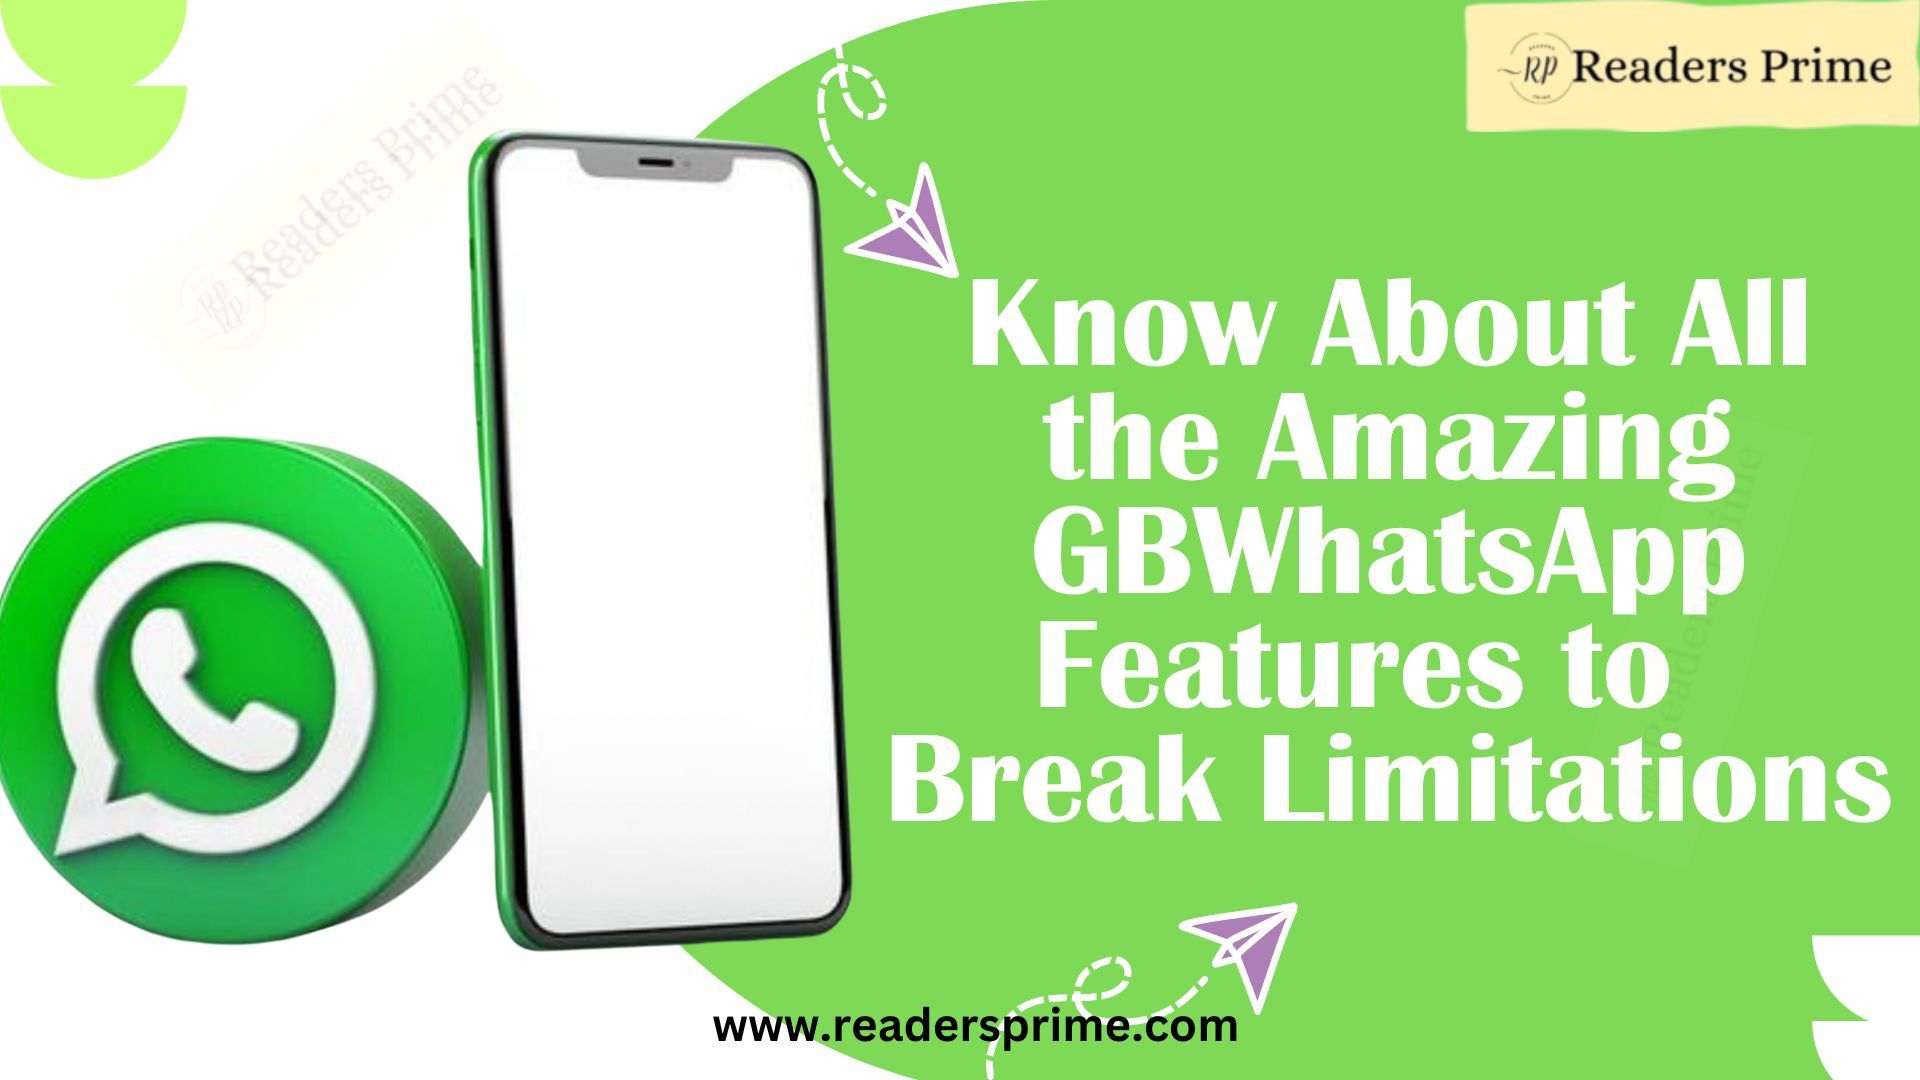 All the Amazing GB WhatsApp Features to Break Limitations